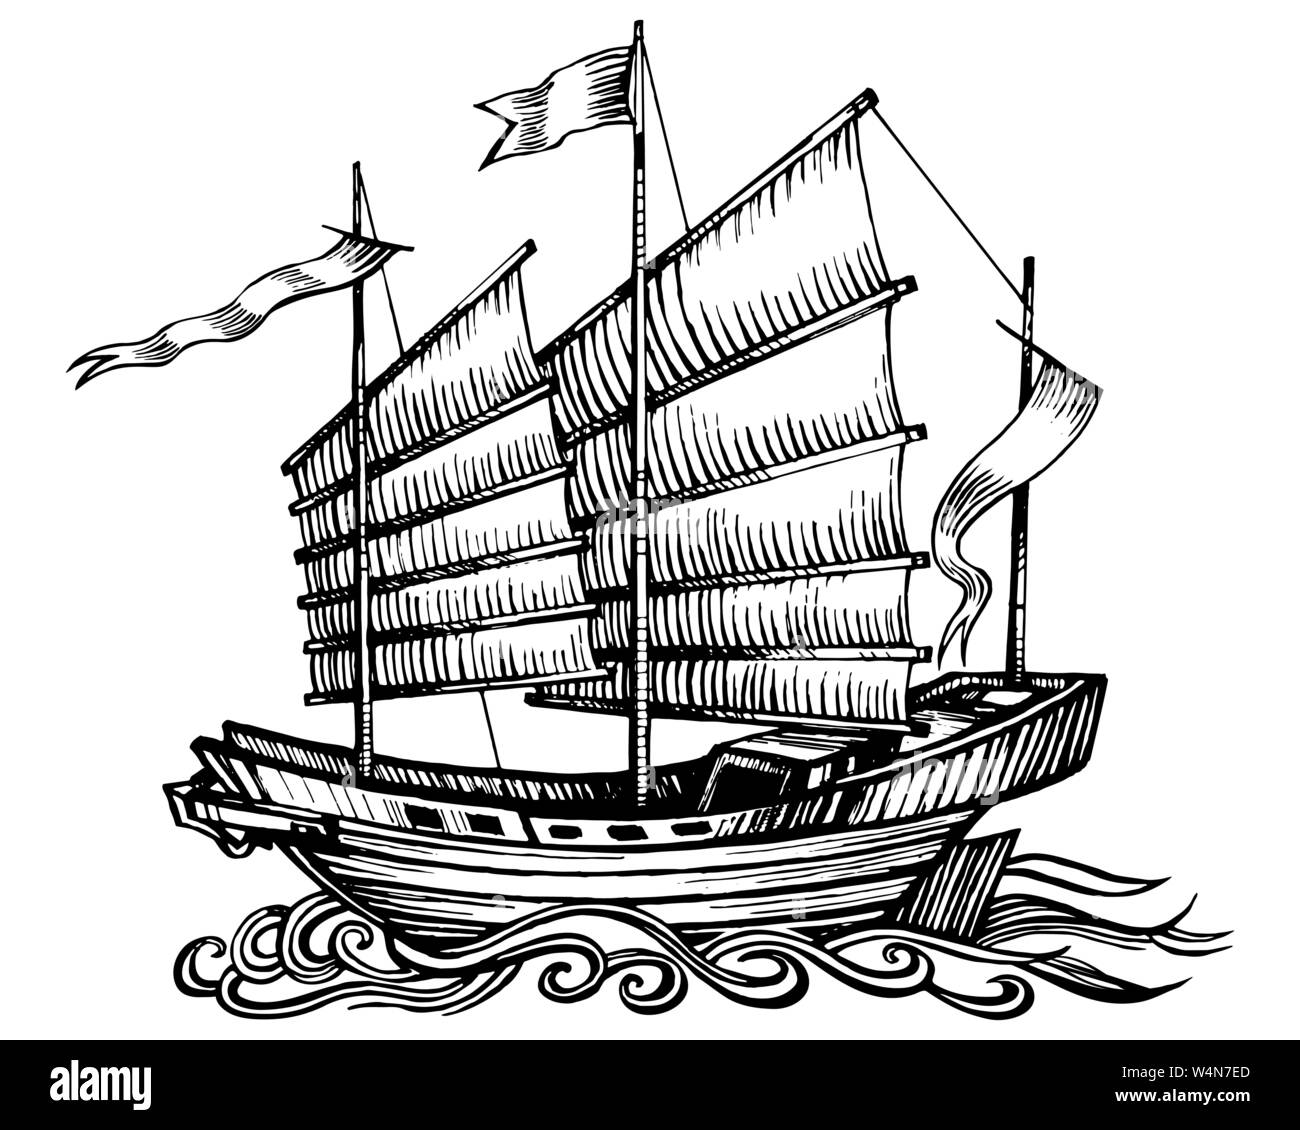 Vintage pirate ship Black and White Stock Photos & Images - Alamy